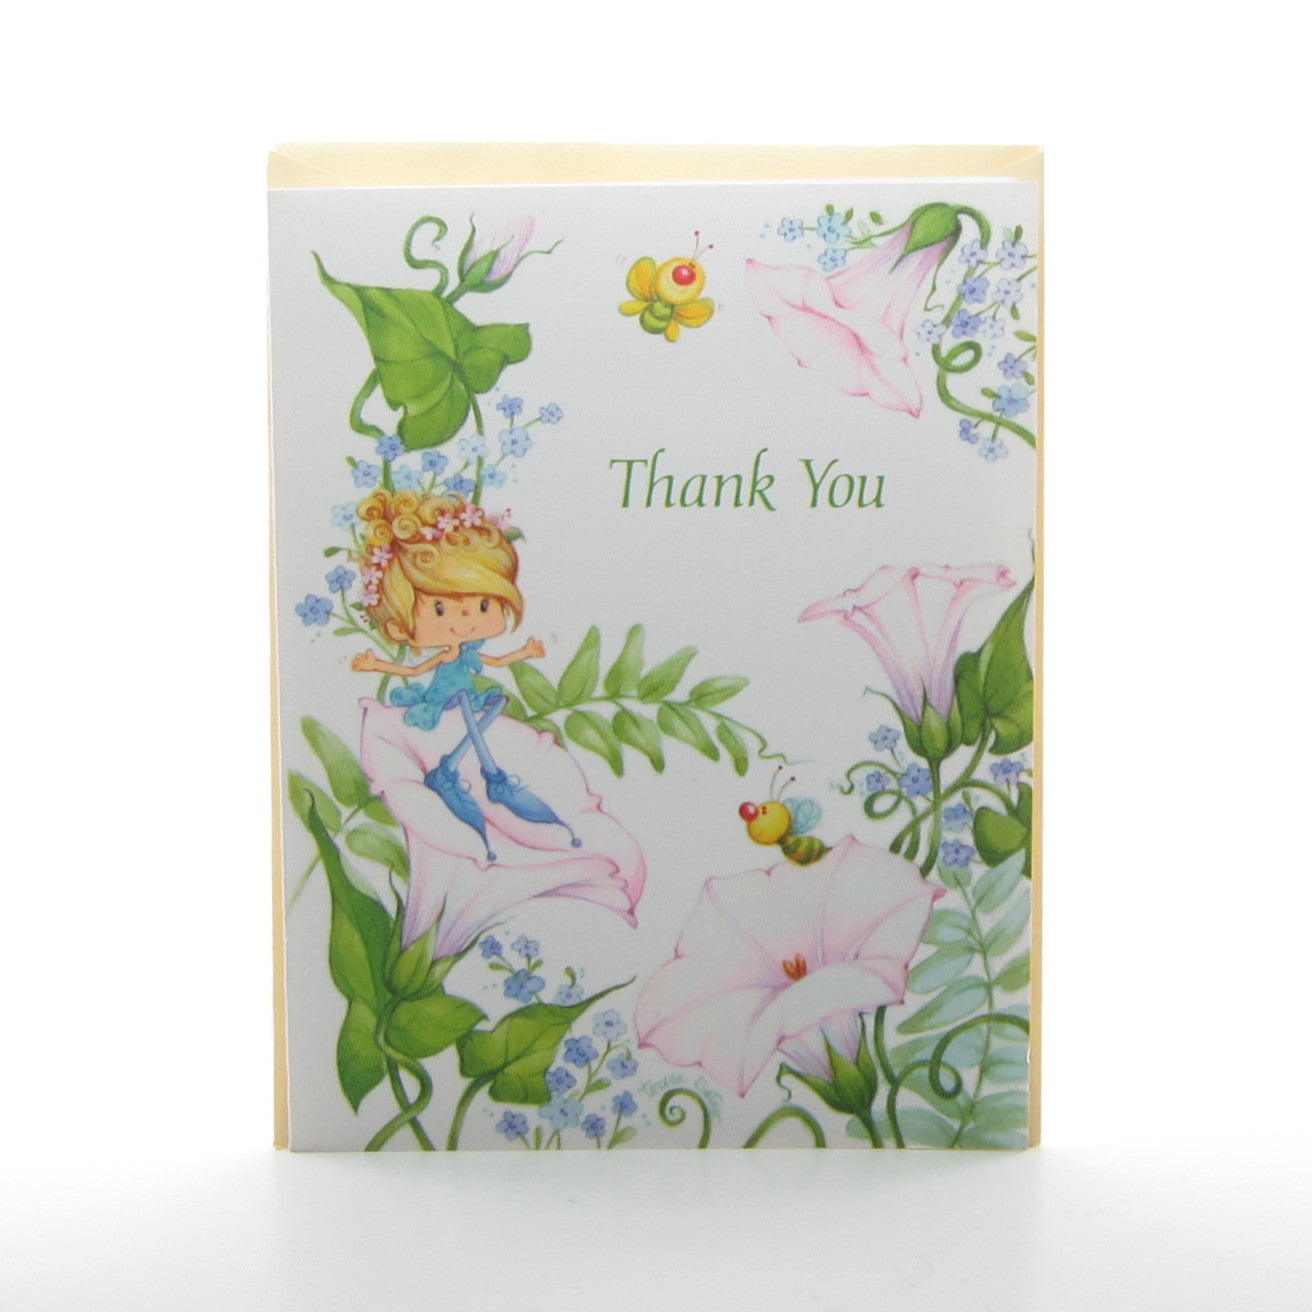 Herself the Elf thank you card with envelope